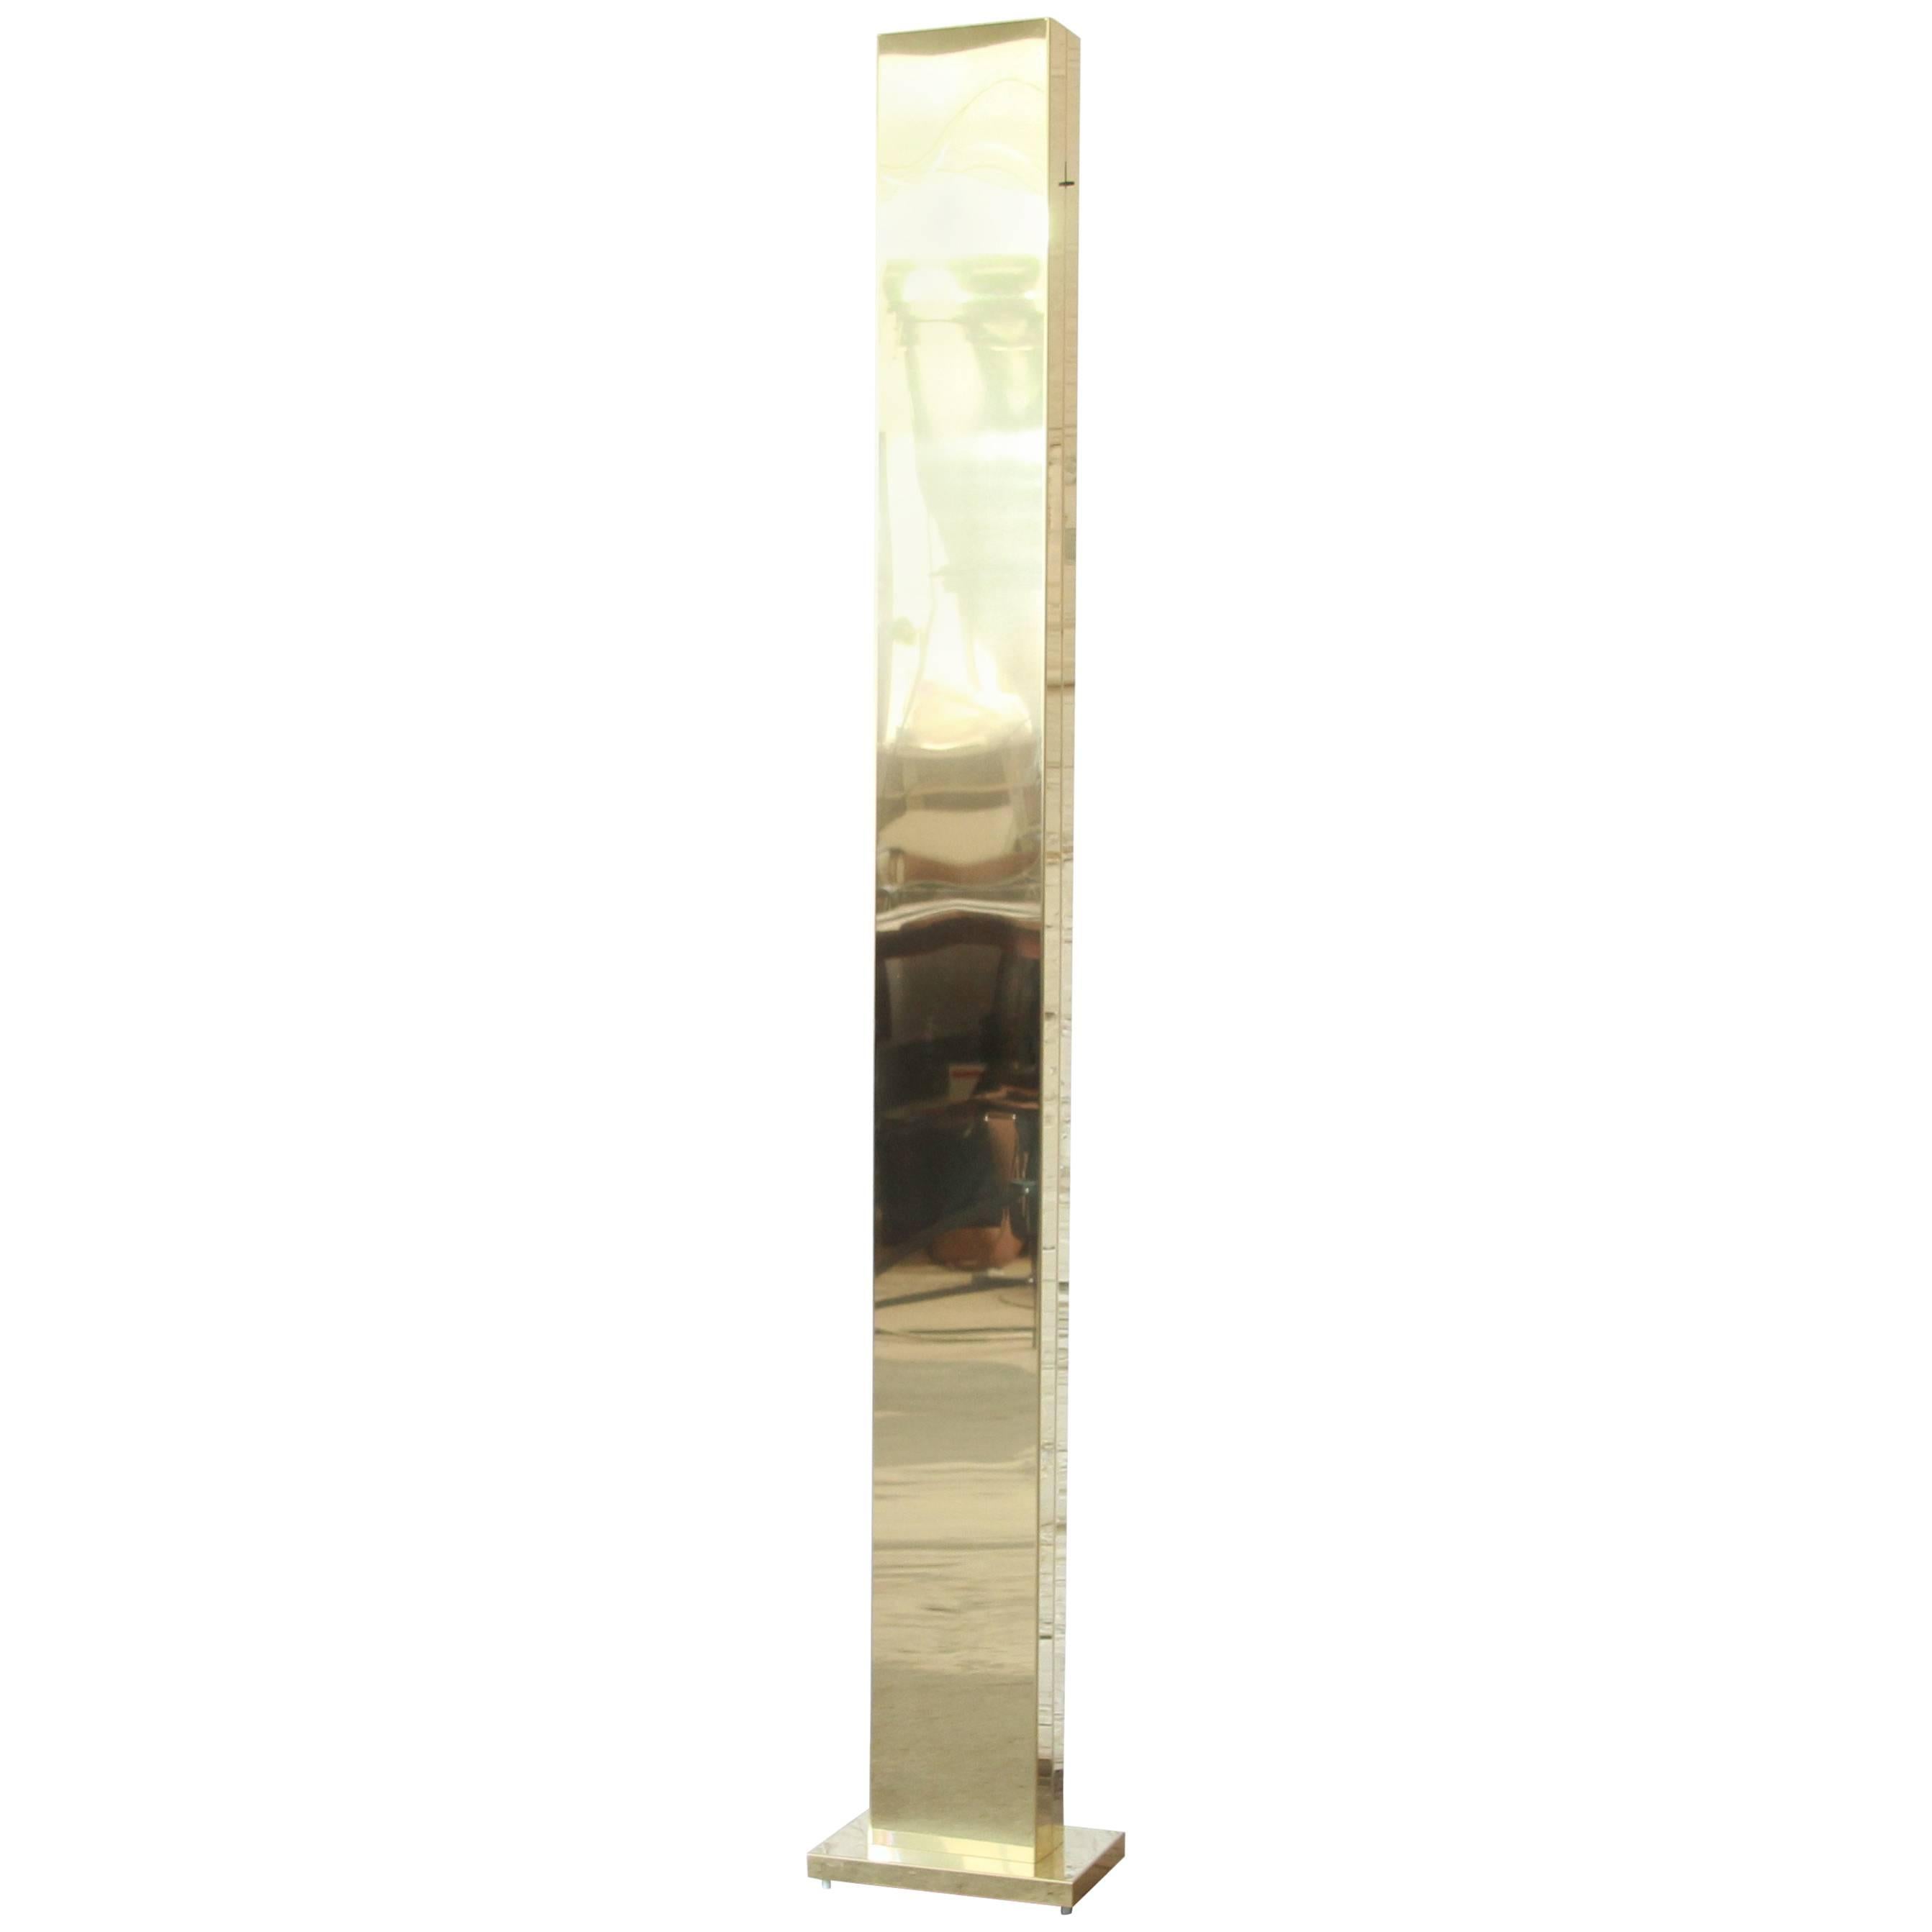 Polished Brass Midcentury Skyscraper Torchiere Floor Lamp by Casella Lighting